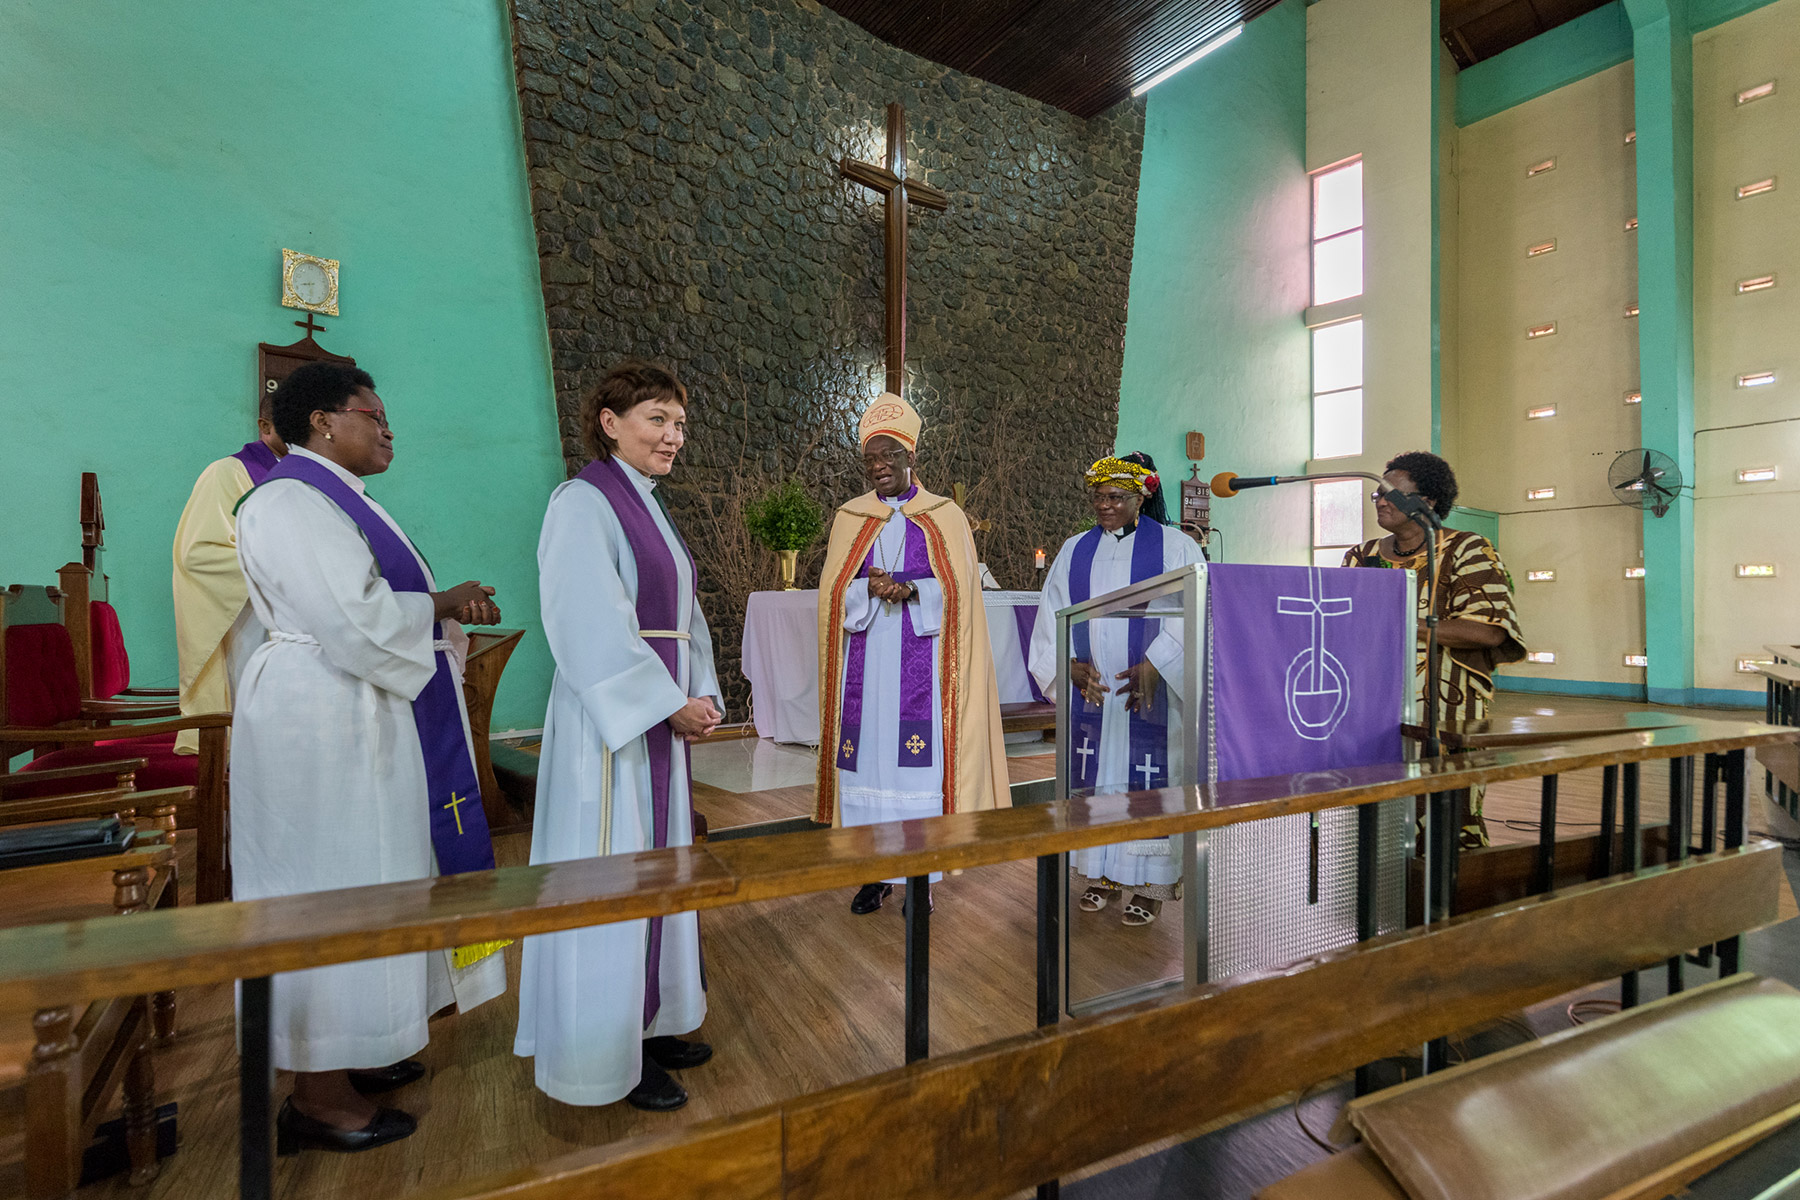 LWF general secretary Rev. Anne Burghardt (left) is welcomed by ELCT Presiding Bishop Dr Fredrick Shoo (right) during Sunday service at the Moshi Lutheran Cathedral on 27 March.